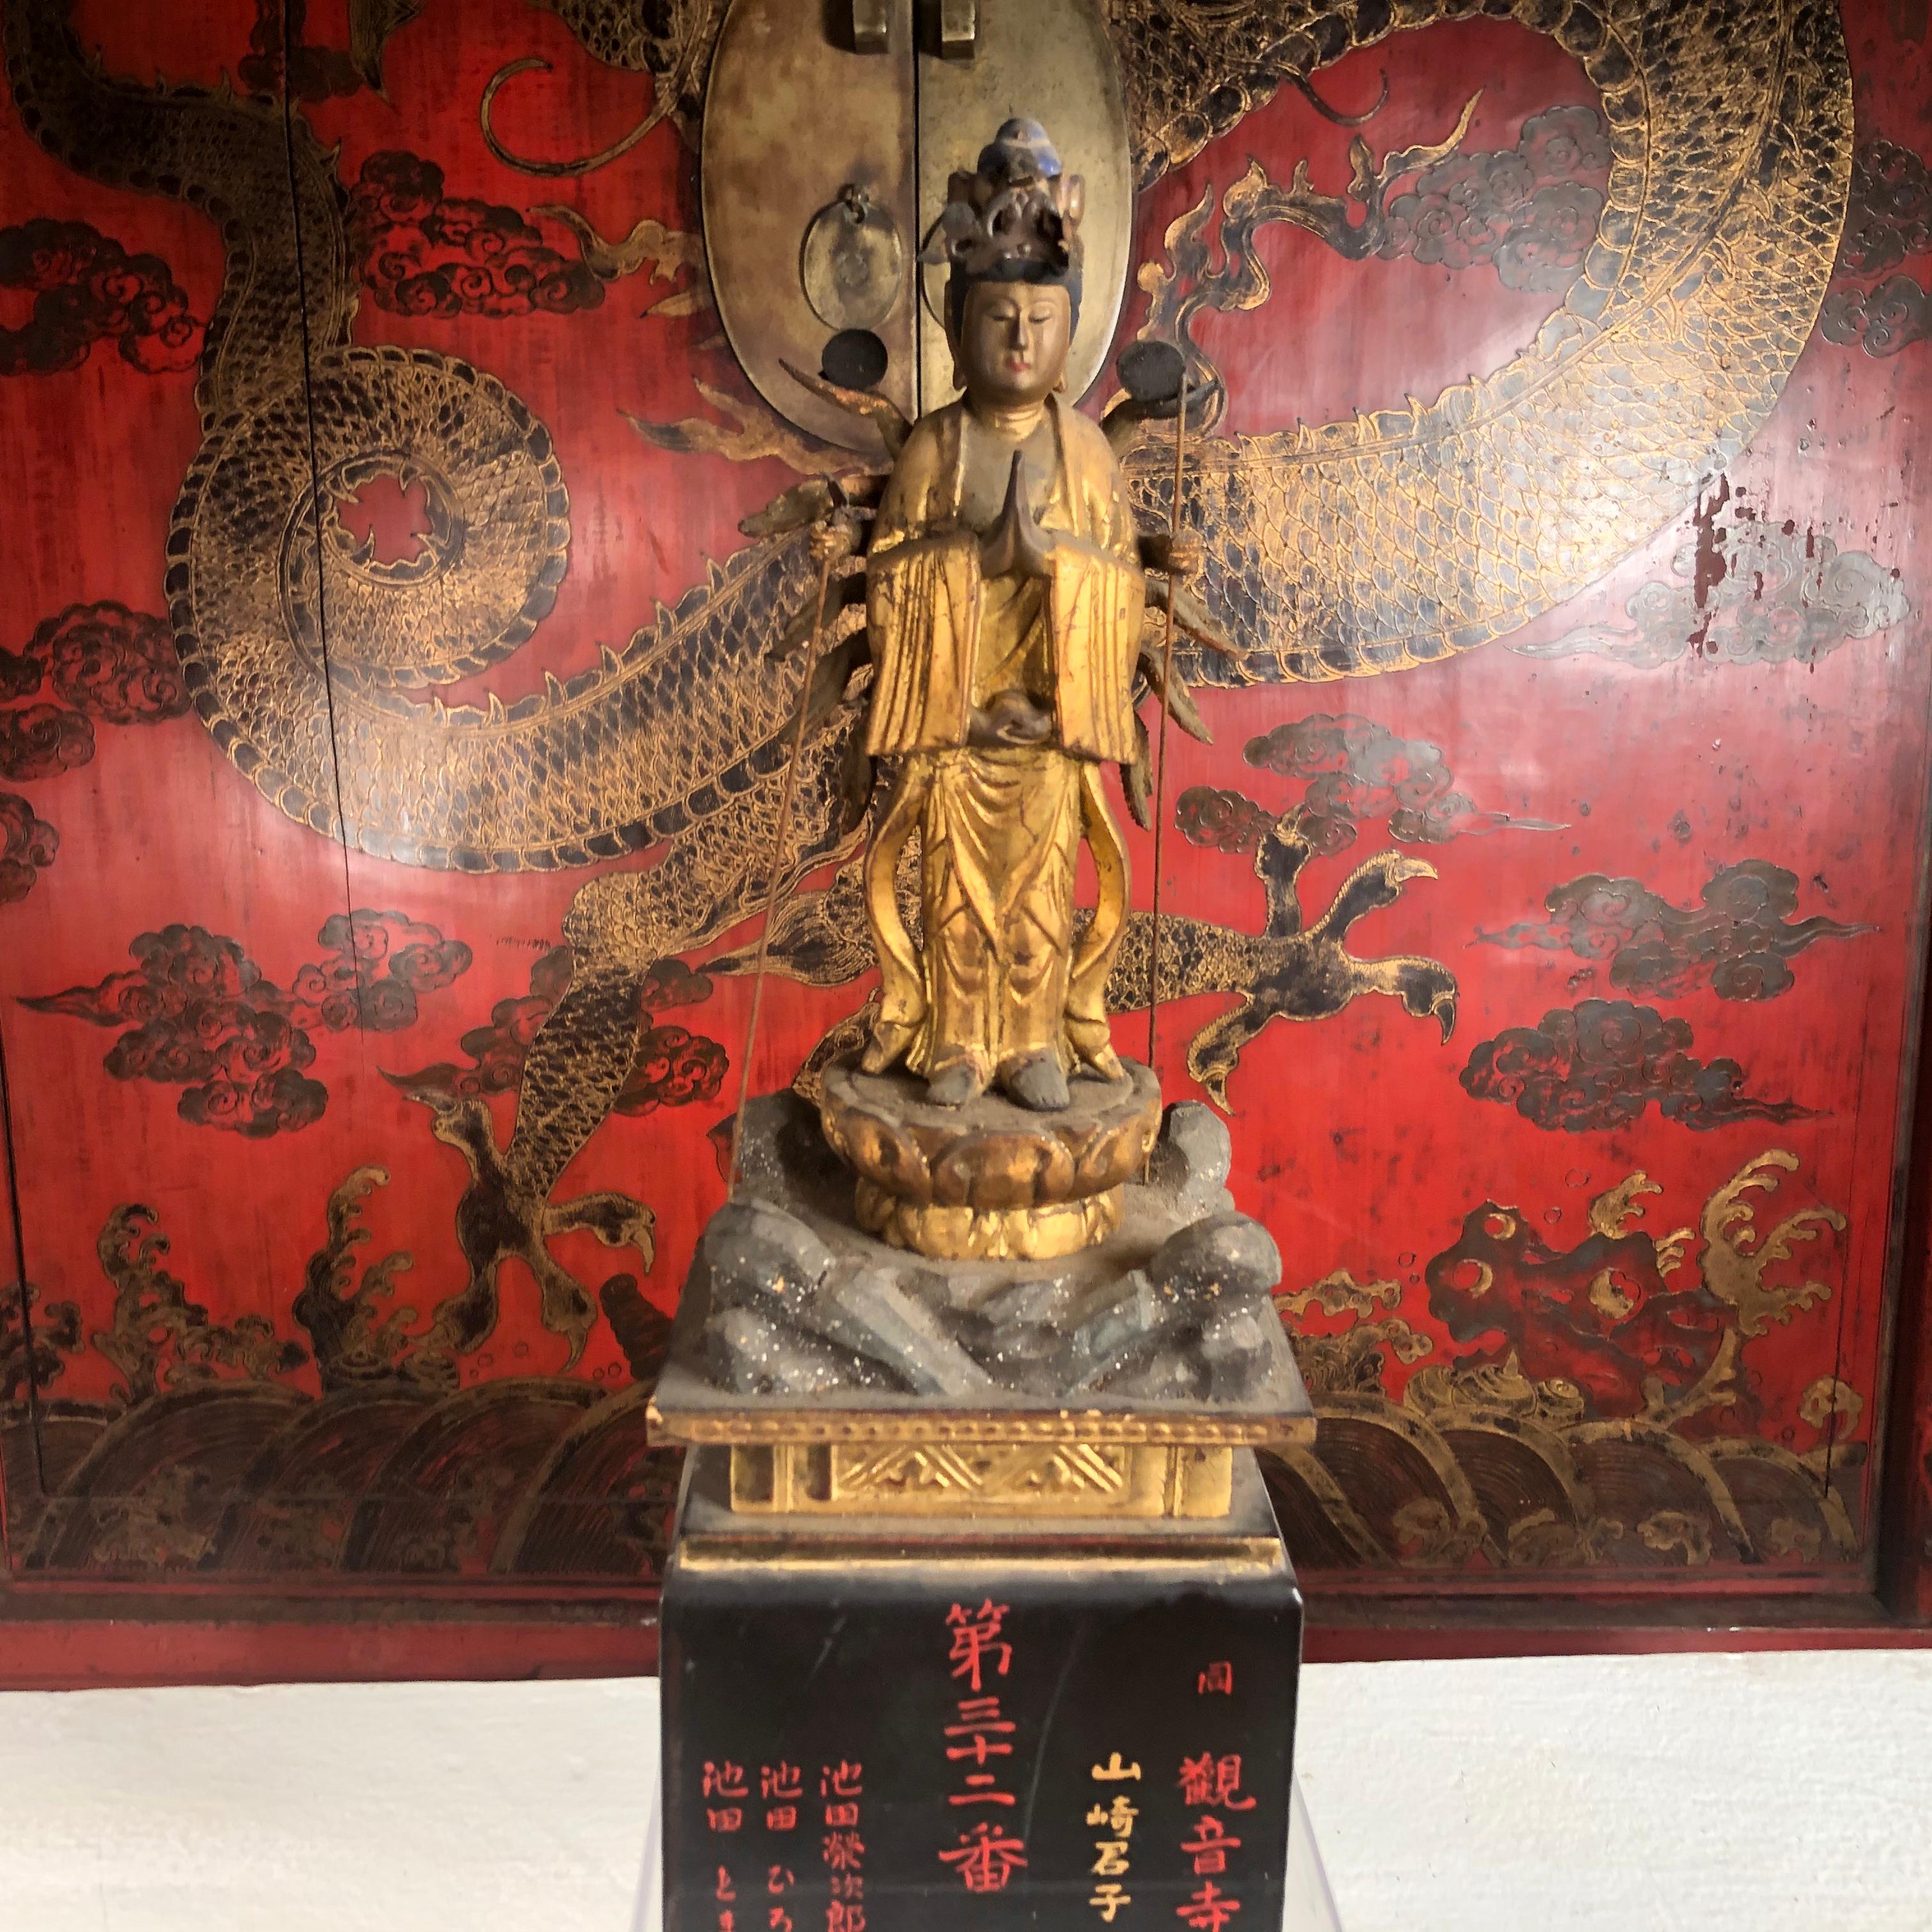 Buddhist Gold Gilt Mankind's Protector, Signed

This is a scarce and lovely Japanese temple find, a gold gilt and lacquered wooden many armed Kanon, Guan yin and Bodhisattva standing tall and with multiple arms and hands in assisting sentient